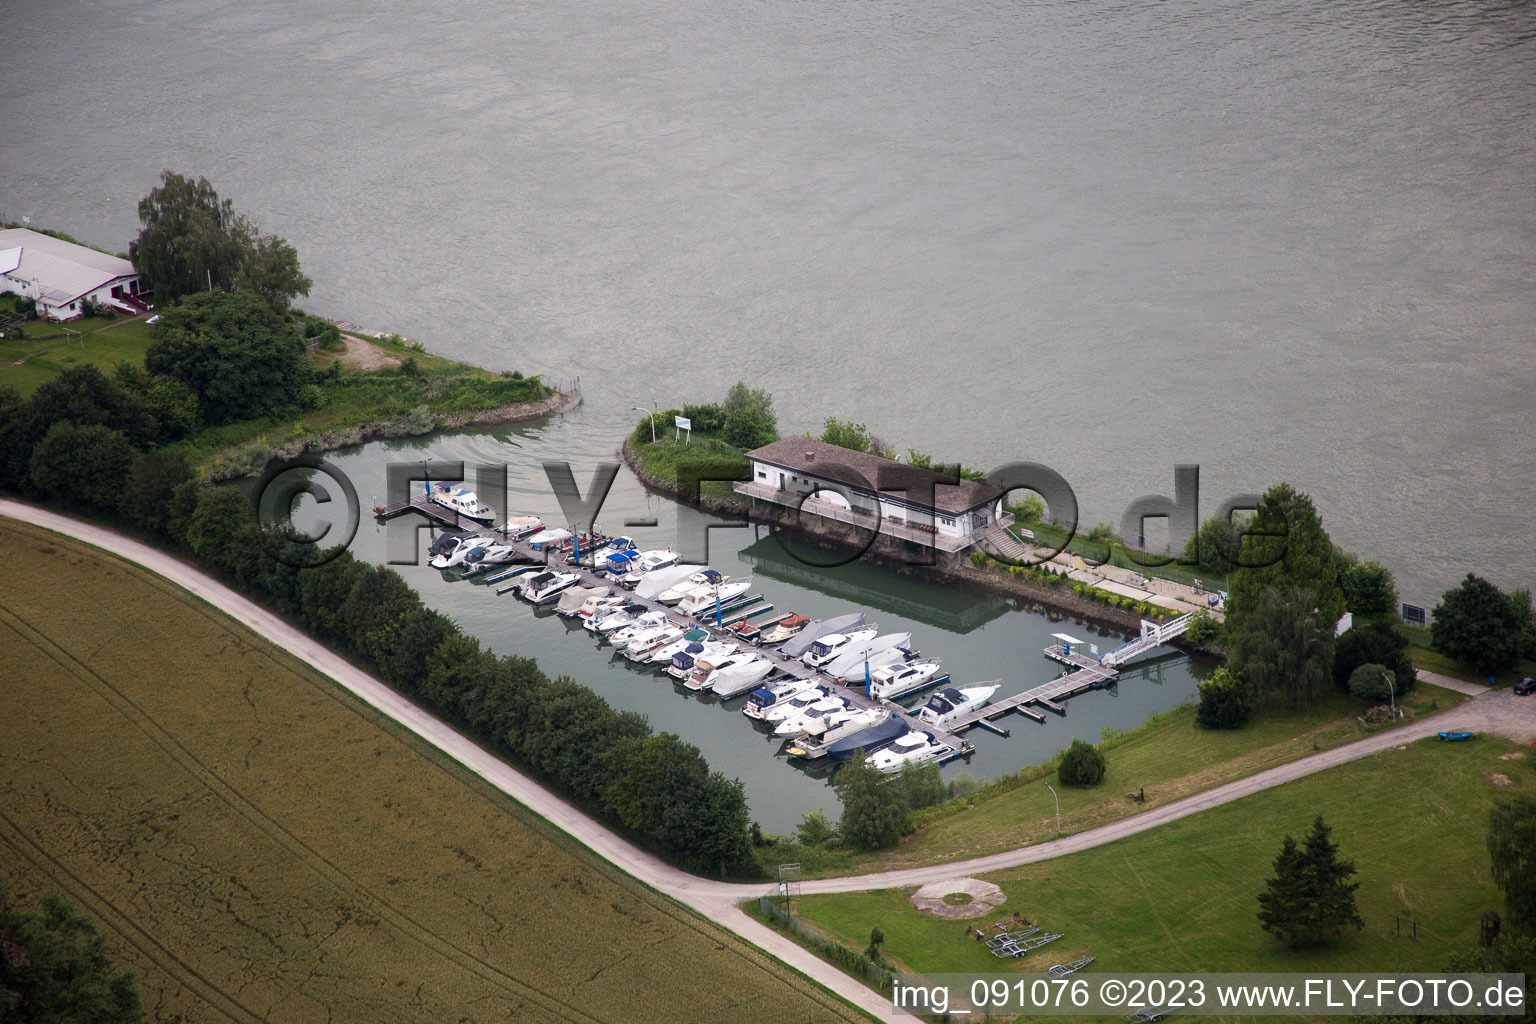 Marina on the Rhine in Worms in the state Rhineland-Palatinate, Germany